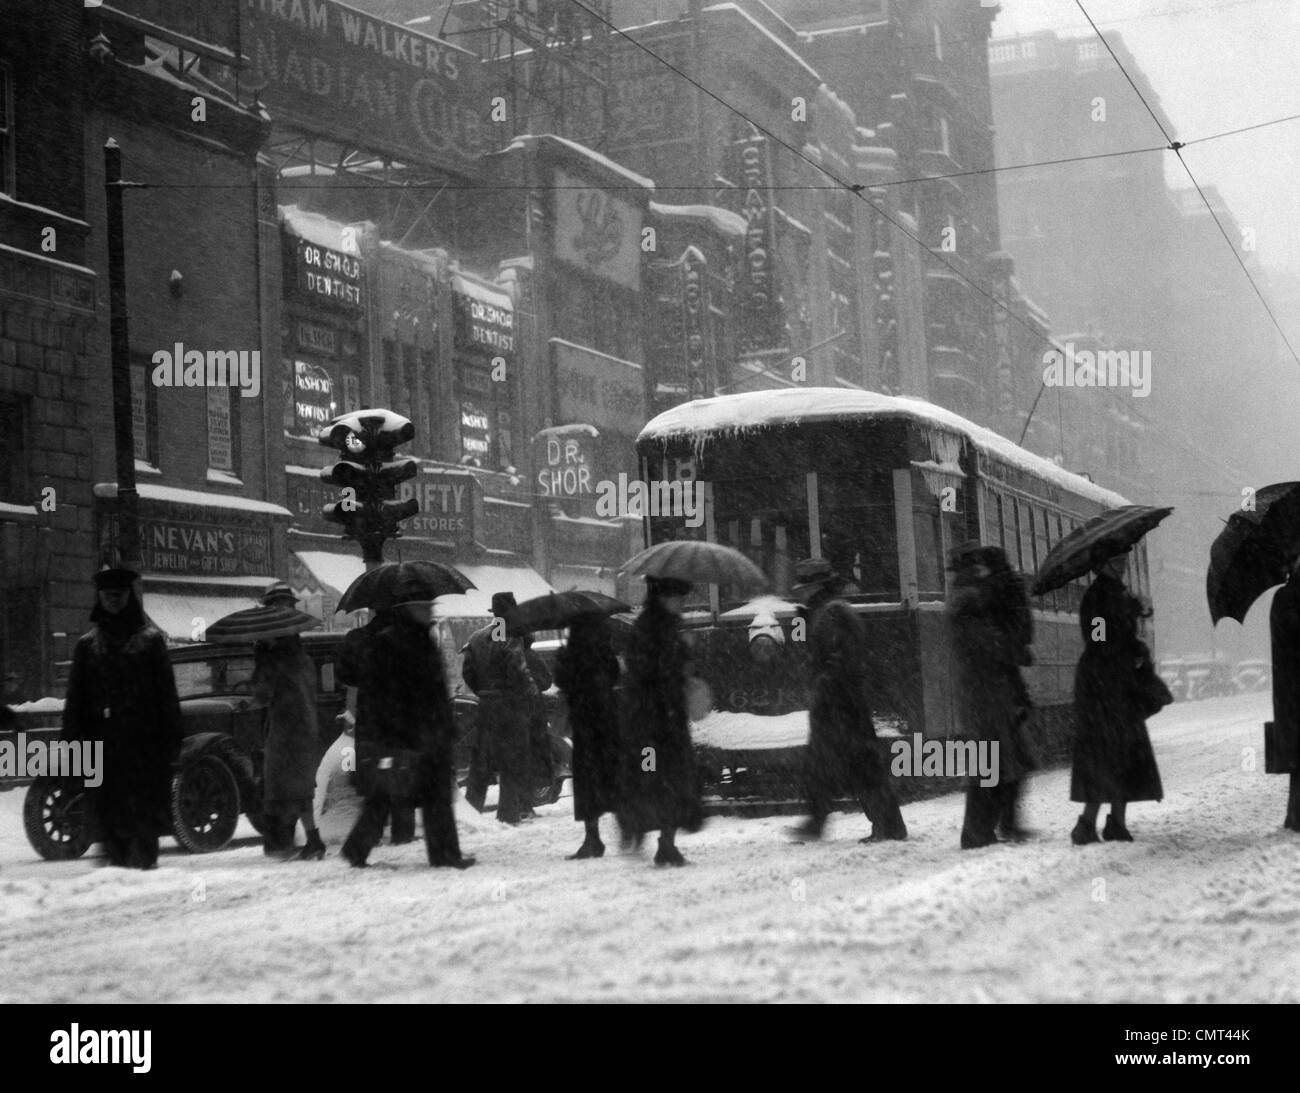 1920s 1930s CROWD CARRYING UMBRELLAS CROSSING STREET IN FRONT OF STREET CAR TROLLEY DURING SNOWSTORM Stock Photo